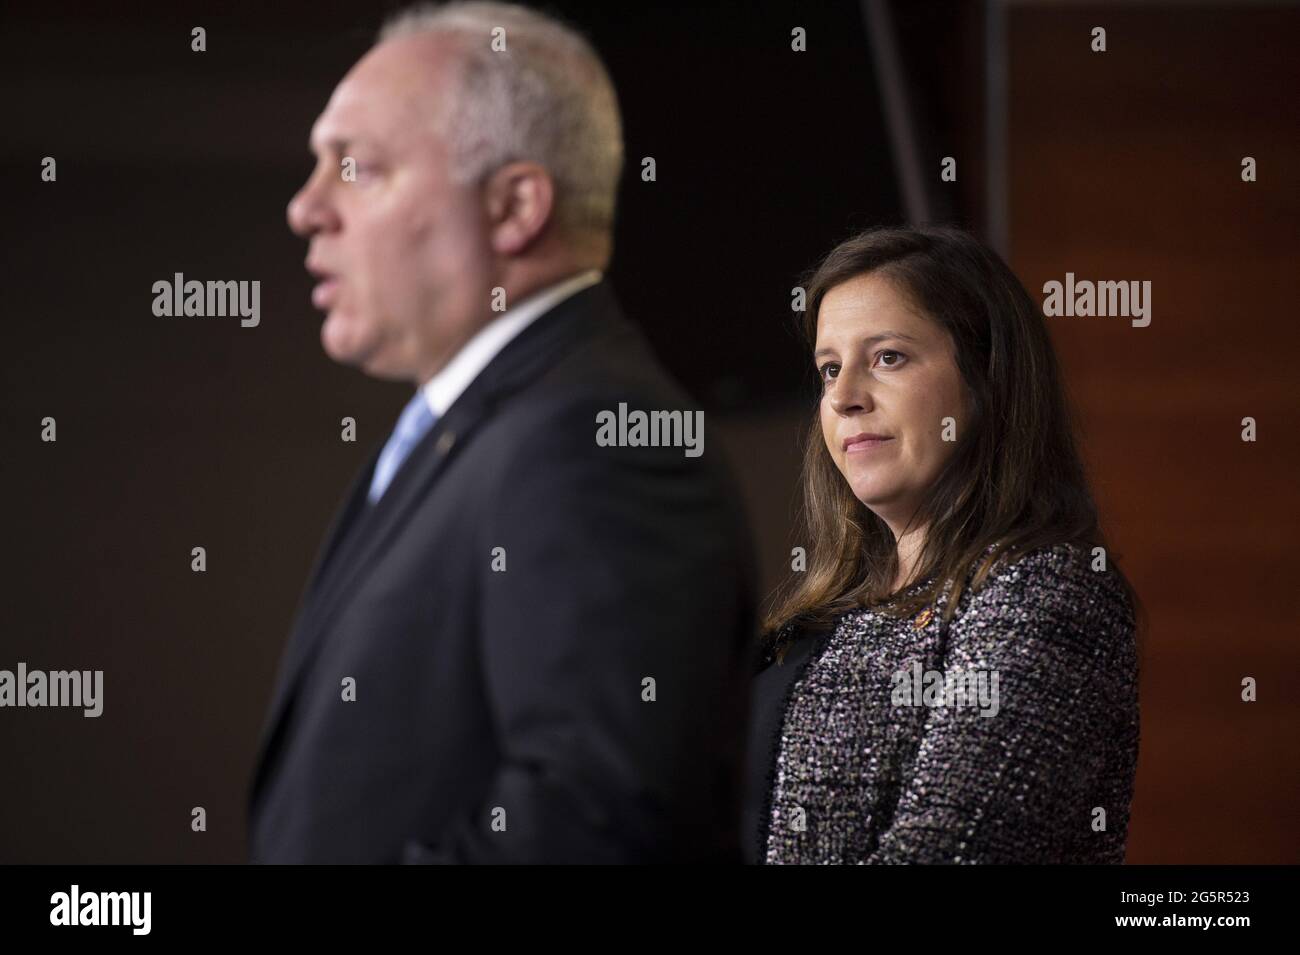 Washington, United States. 29th June, 2021. House Minority Whip Steve Scalise, R-LA, speaks as Rep. Elise Stefanik, R-NY, listens during a press conference on the COVID-19 virus, at the U.S. Capitol in Washington, DC., on Tuesday, June 29, 2021. Photo by Bonnie Cash/UPI Credit: UPI/Alamy Live News Stock Photo